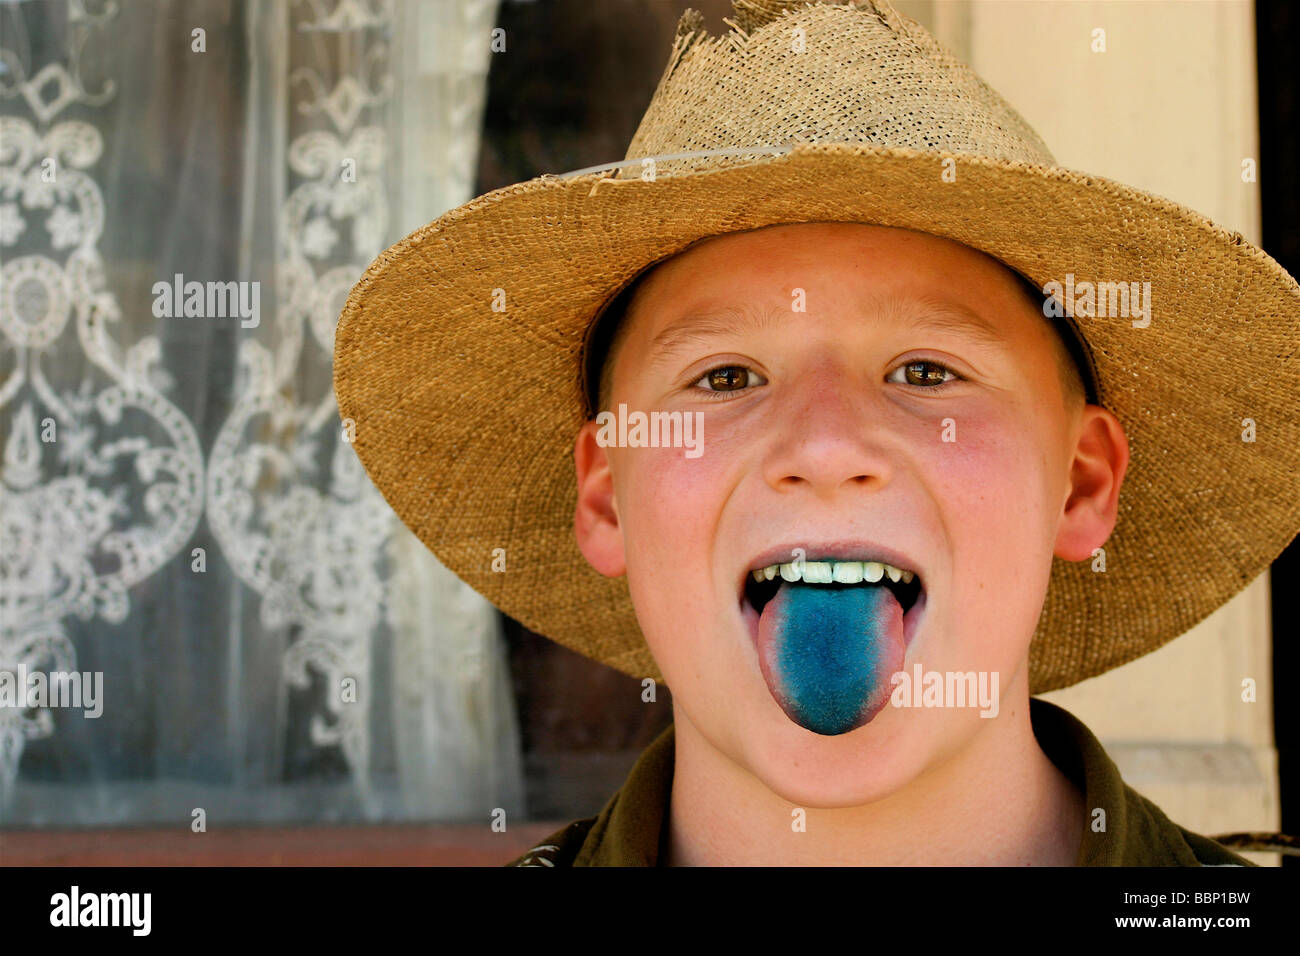 Blue tongued boy.  Freckle faced and adorable this all American boy sticks out his blue lollipop stained tongue for the camera. Stock Photo